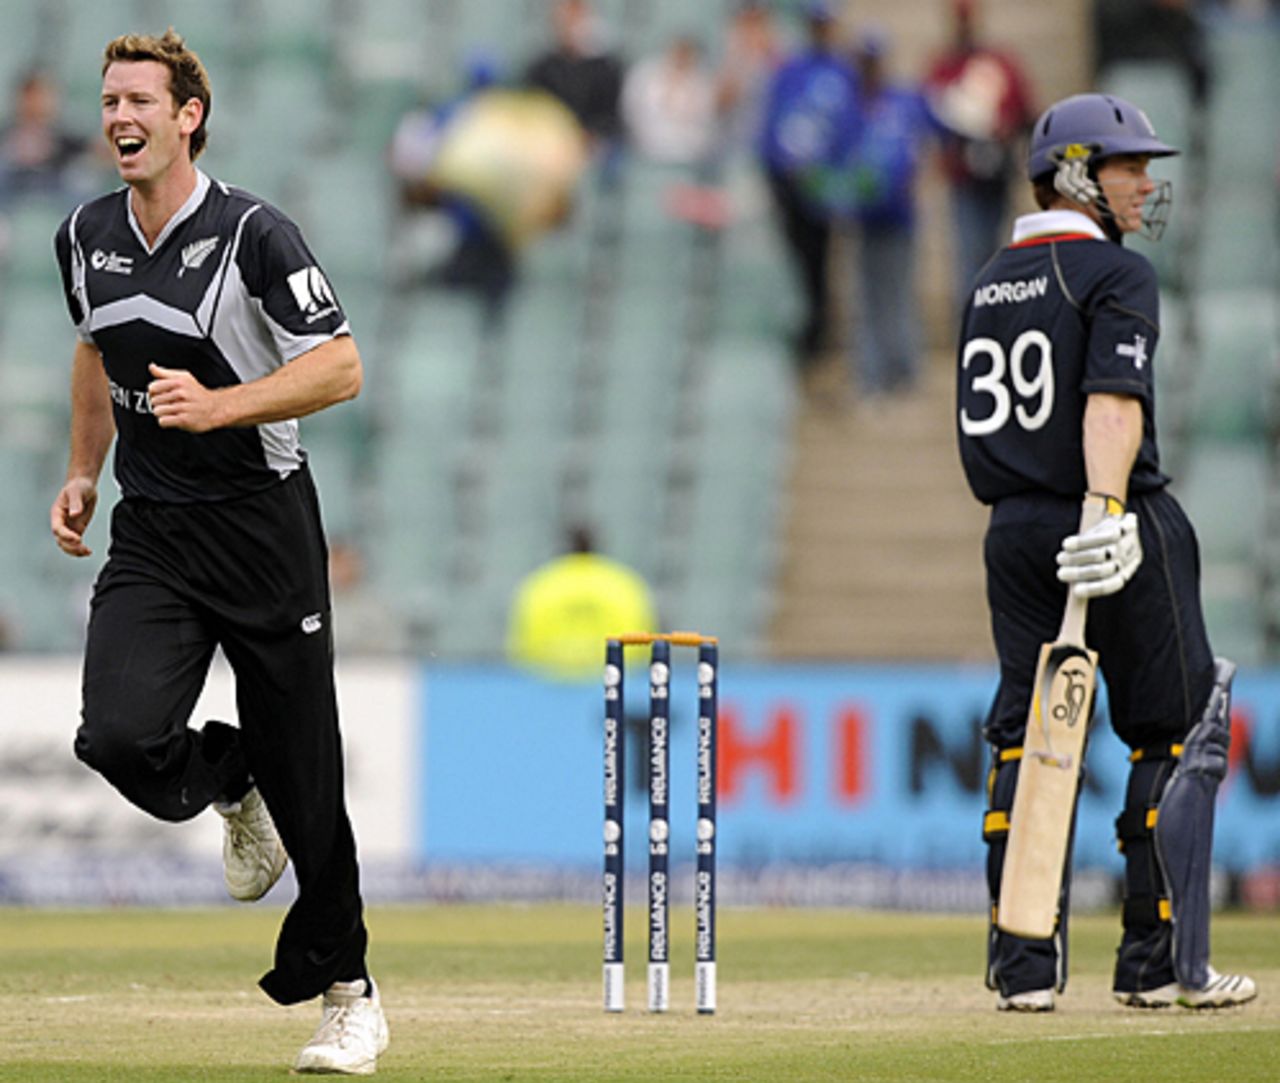 Ian Butler is delighted after picking up Eoin Morgan's wicket, England v New Zealand, ICC Champions Trophy, Group B, Johannesburg, September 29, 2009